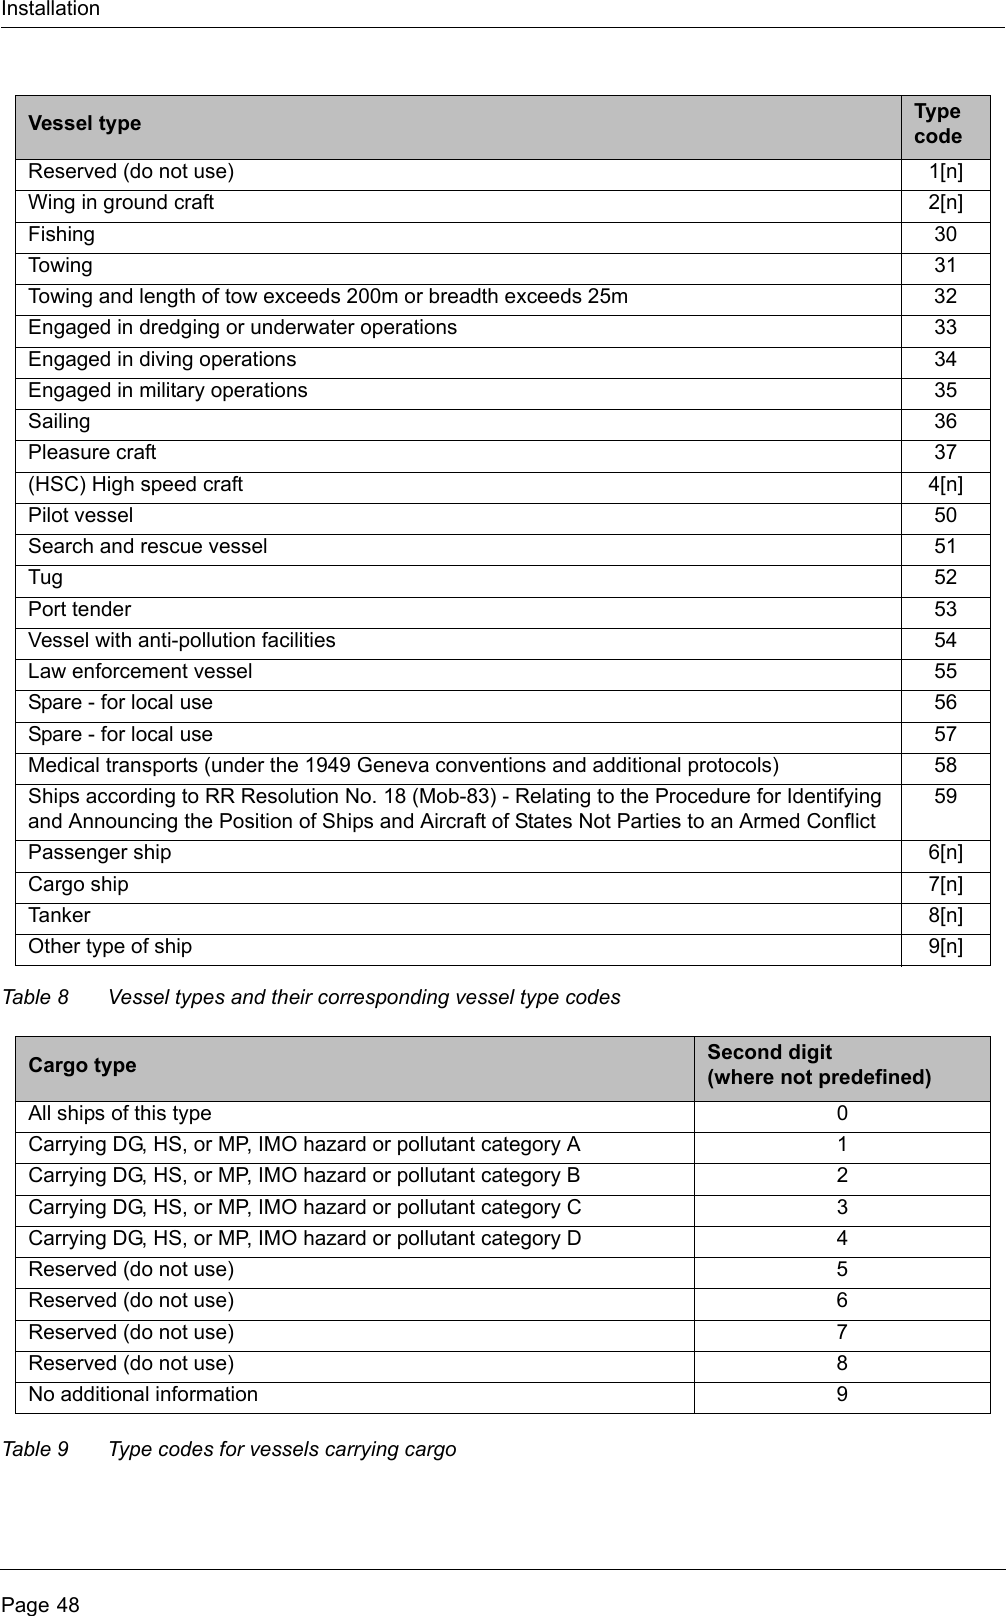 InstallationPage 48Table 8 Vessel types and their corresponding vessel type codesTable 9 Type codes for vessels carrying cargoVessel type Type codeReserved (do not use) 1[n]Wing in ground craft 2[n]Fishing 30Towing 31Towing and length of tow exceeds 200m or breadth exceeds 25m 32Engaged in dredging or underwater operations 33Engaged in diving operations 34Engaged in military operations 35Sailing 36Pleasure craft 37(HSC) High speed craft 4[n]Pilot vessel 50Search and rescue vessel 51Tug 52Port tender 53Vessel with anti-pollution facilities 54Law enforcement vessel 55Spare - for local use 56Spare - for local use 57Medical transports (under the 1949 Geneva conventions and additional protocols) 58Ships according to RR Resolution No. 18 (Mob-83) - Relating to the Procedure for Identifying and Announcing the Position of Ships and Aircraft of States Not Parties to an Armed Conflict59Passenger ship 6[n]Cargo ship 7[n]Tanker 8[n]Other type of ship 9[n]Cargo type Second digit(where not predefined)All ships of this type 0Carrying DG, HS, or MP, IMO hazard or pollutant category A 1Carrying DG, HS, or MP, IMO hazard or pollutant category B 2Carrying DG, HS, or MP, IMO hazard or pollutant category C 3Carrying DG, HS, or MP, IMO hazard or pollutant category D 4Reserved (do not use) 5Reserved (do not use) 6Reserved (do not use) 7Reserved (do not use) 8No additional information 9